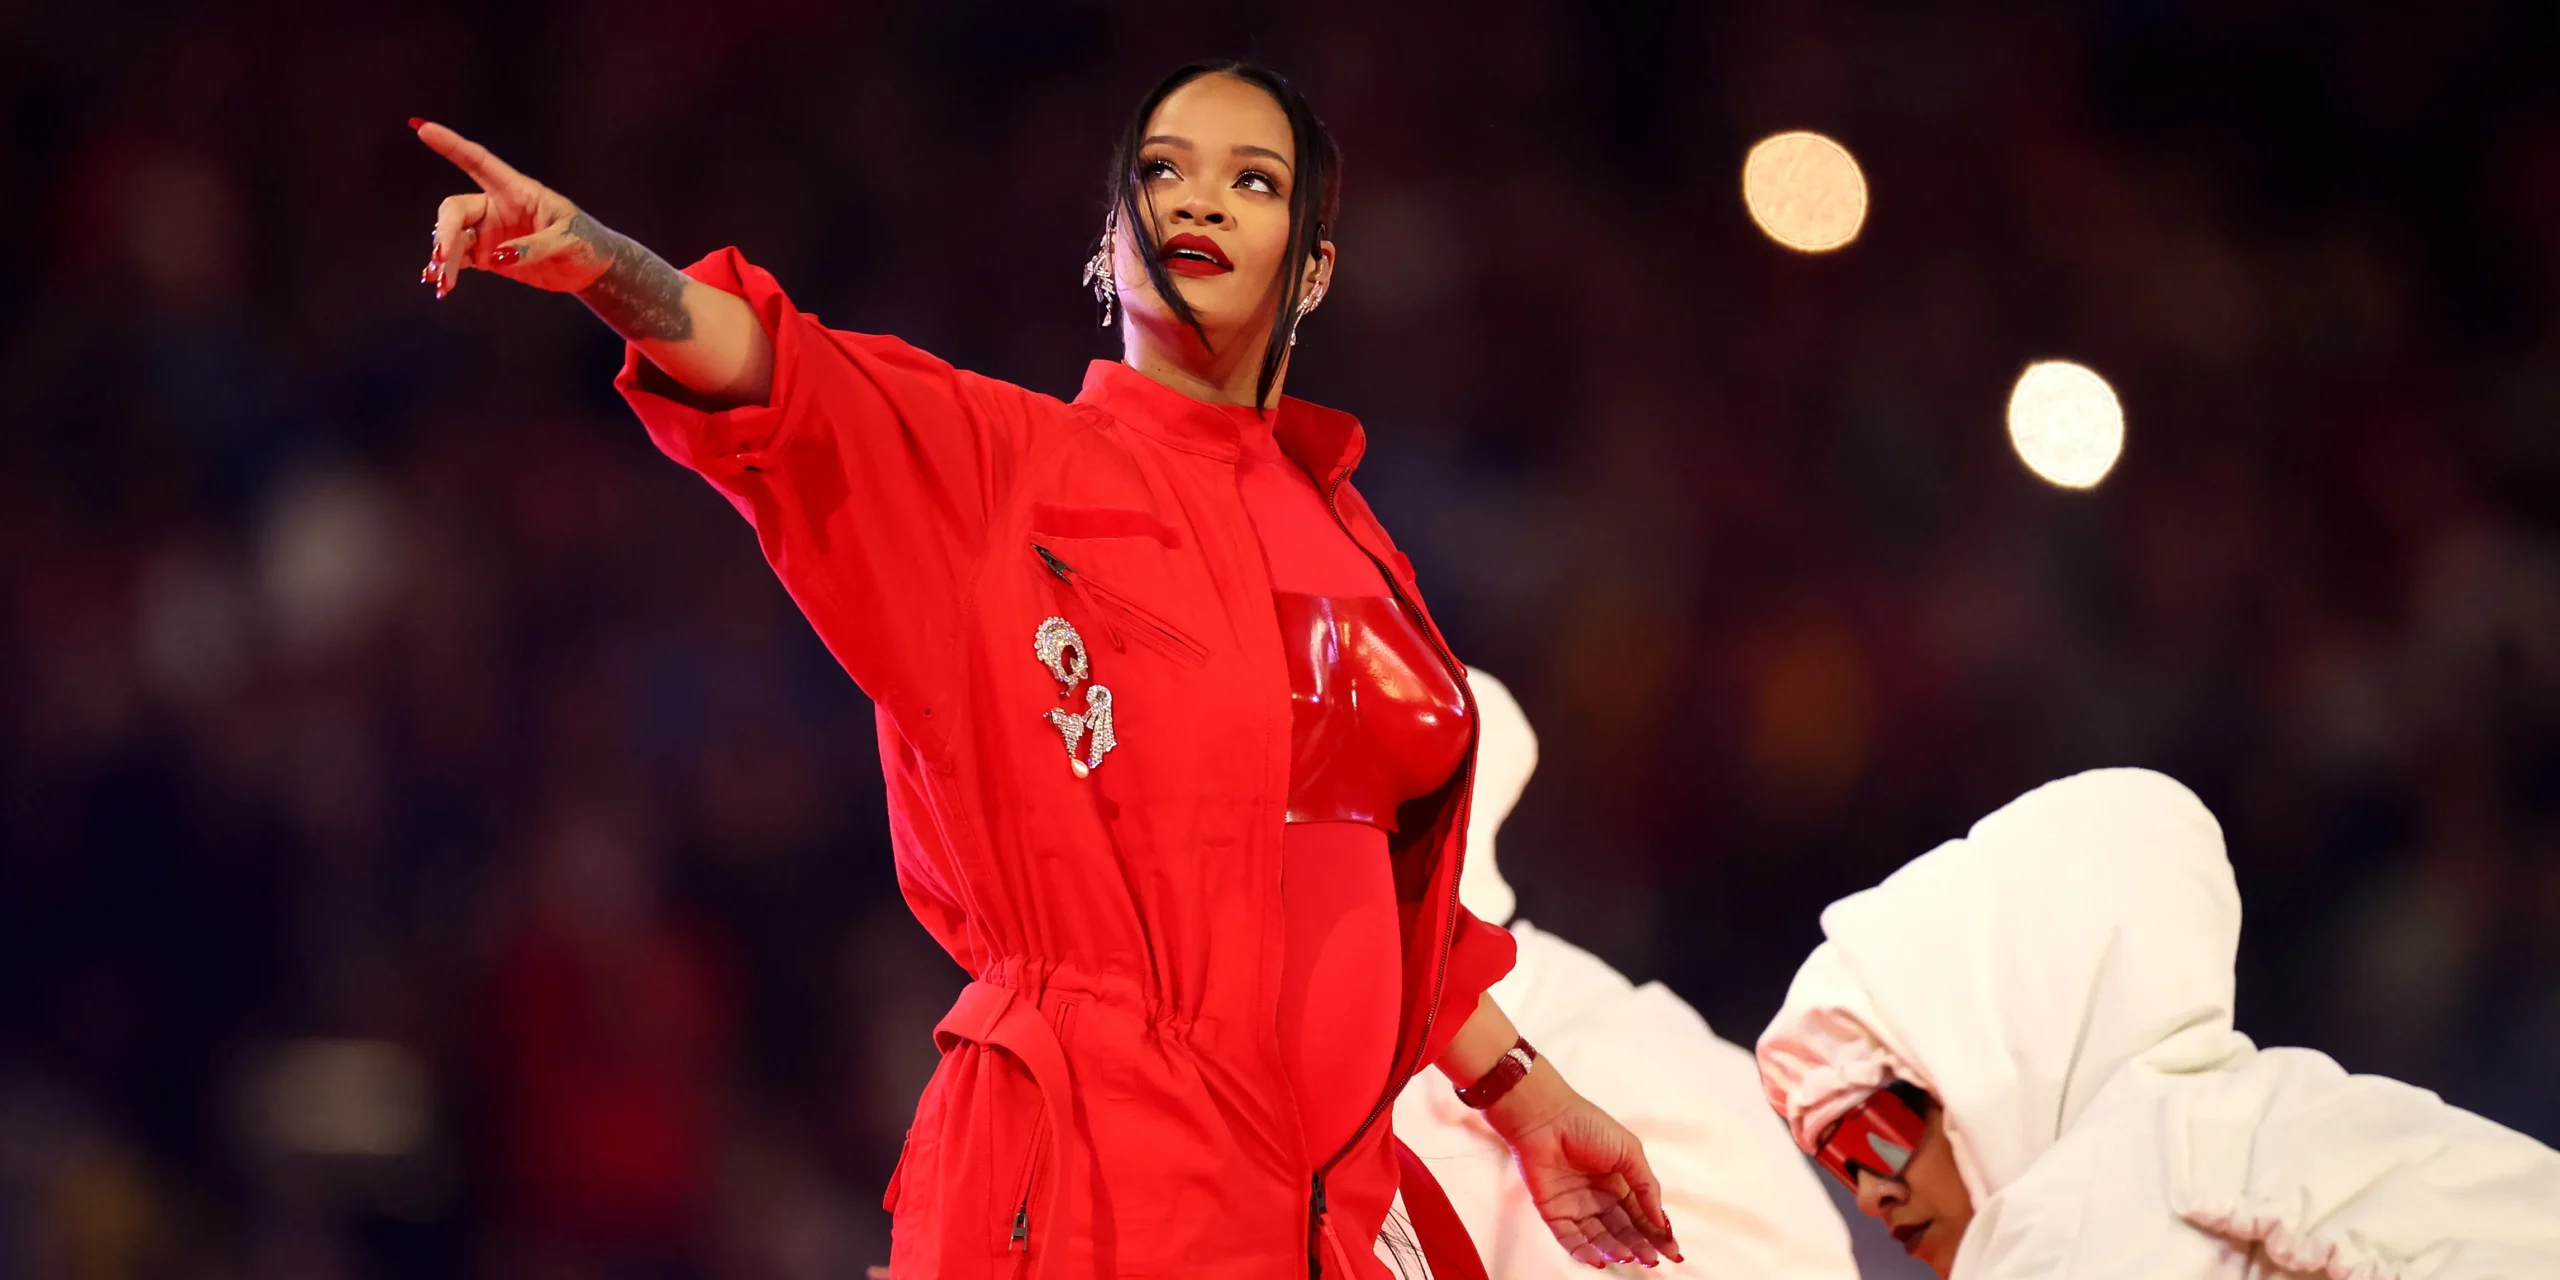 You are currently viewing A Global Spectacle: The LVII Super Bowl Halftime Show